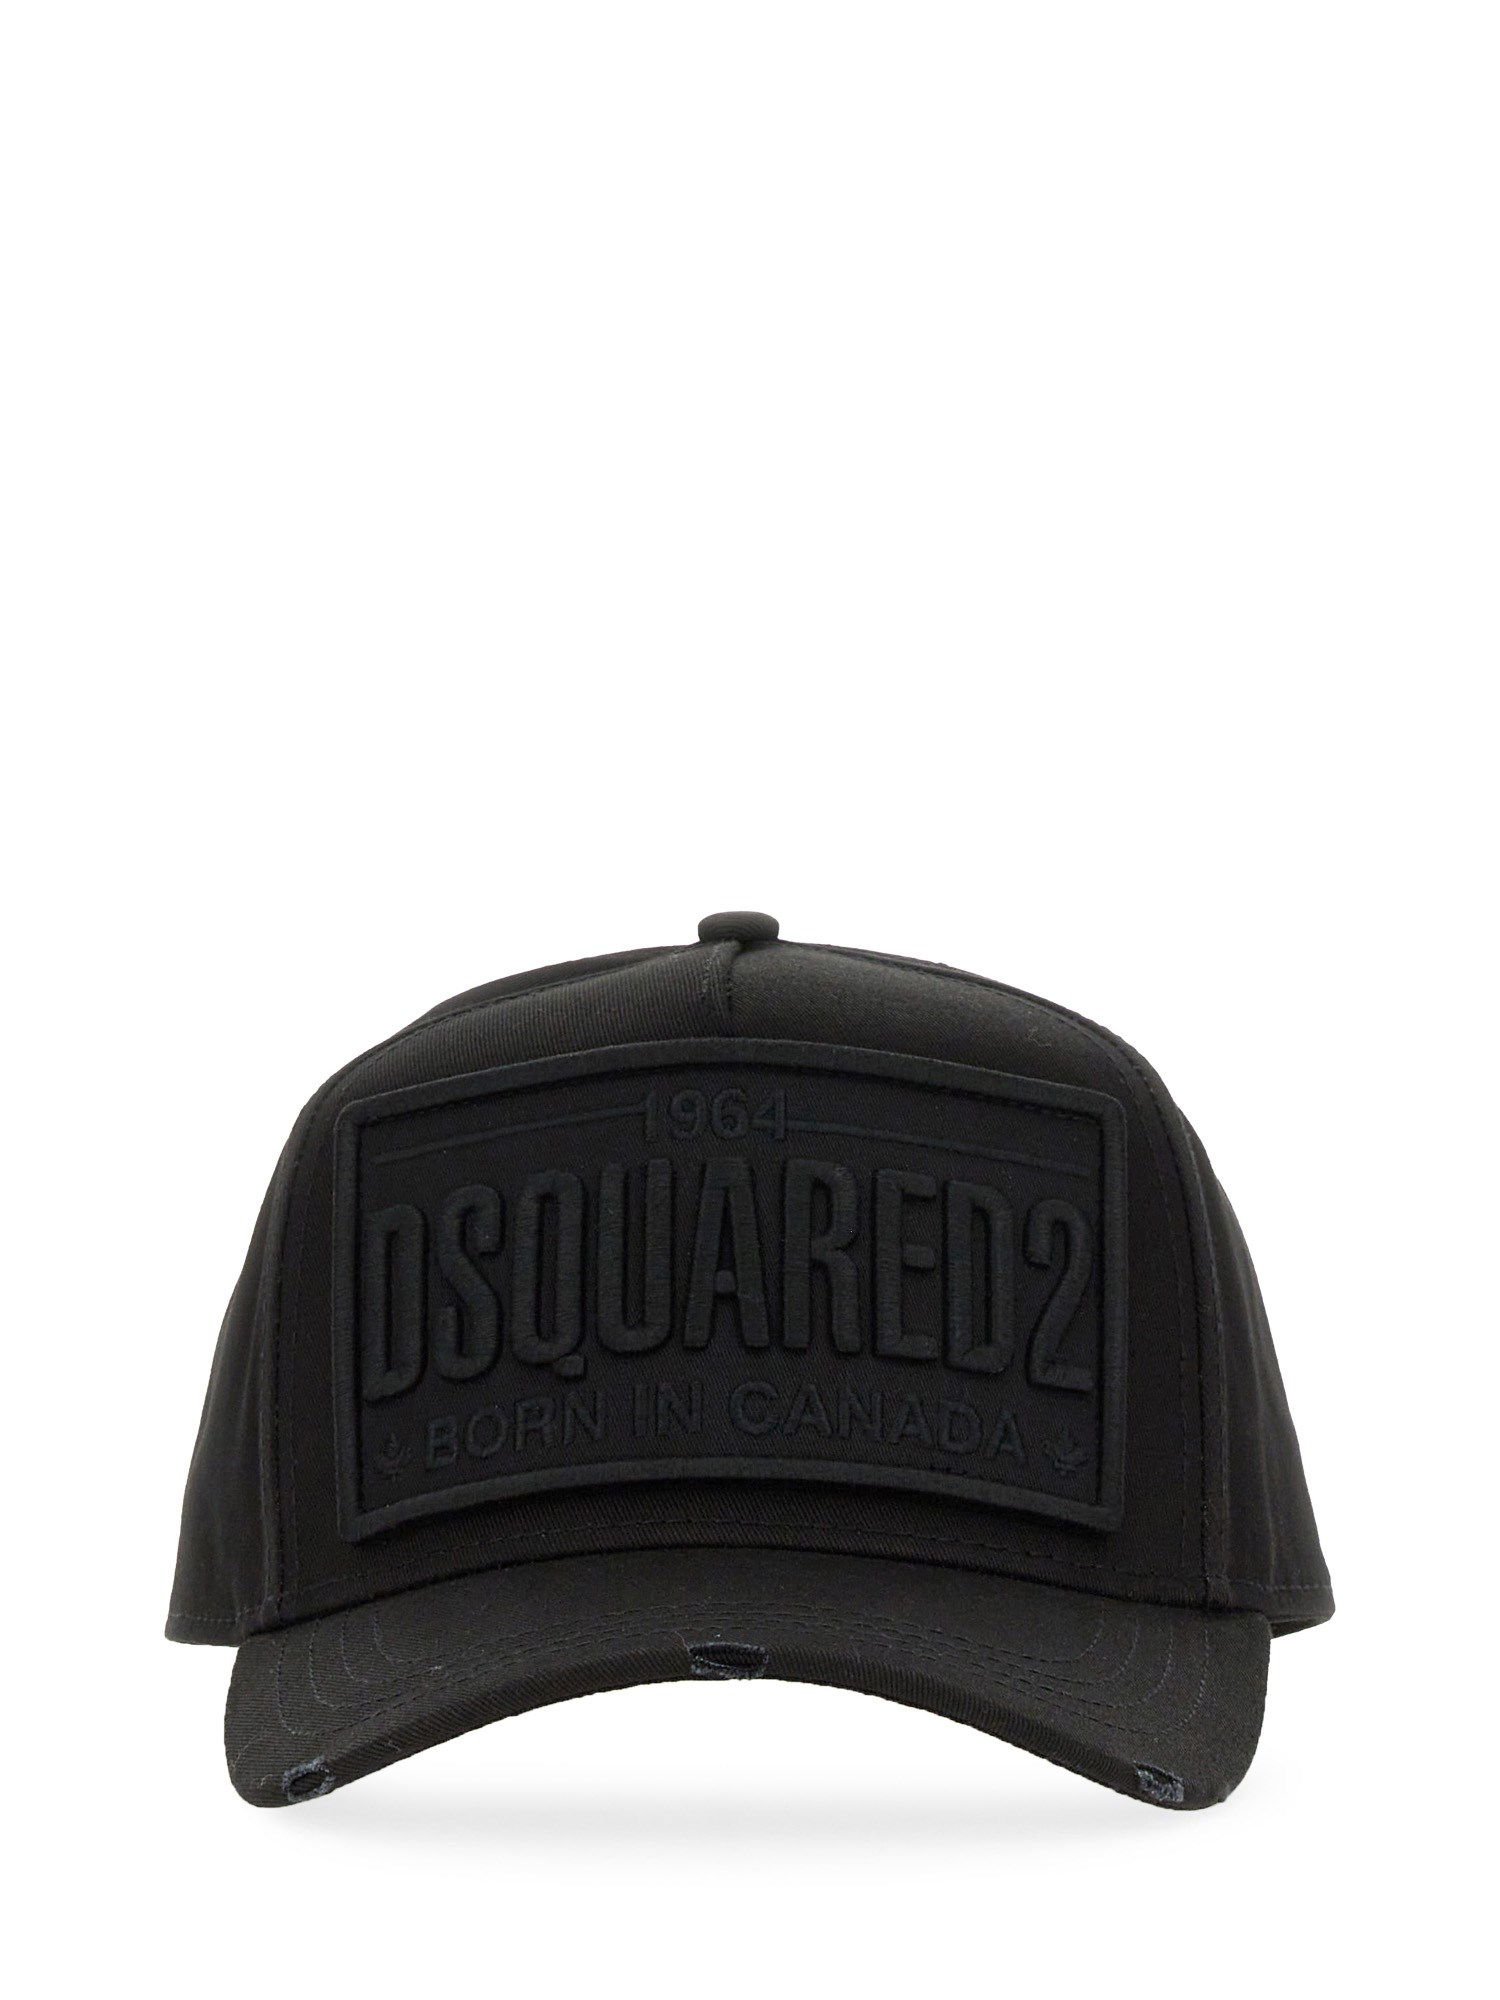 dsquared dsquared baseball hat with logo